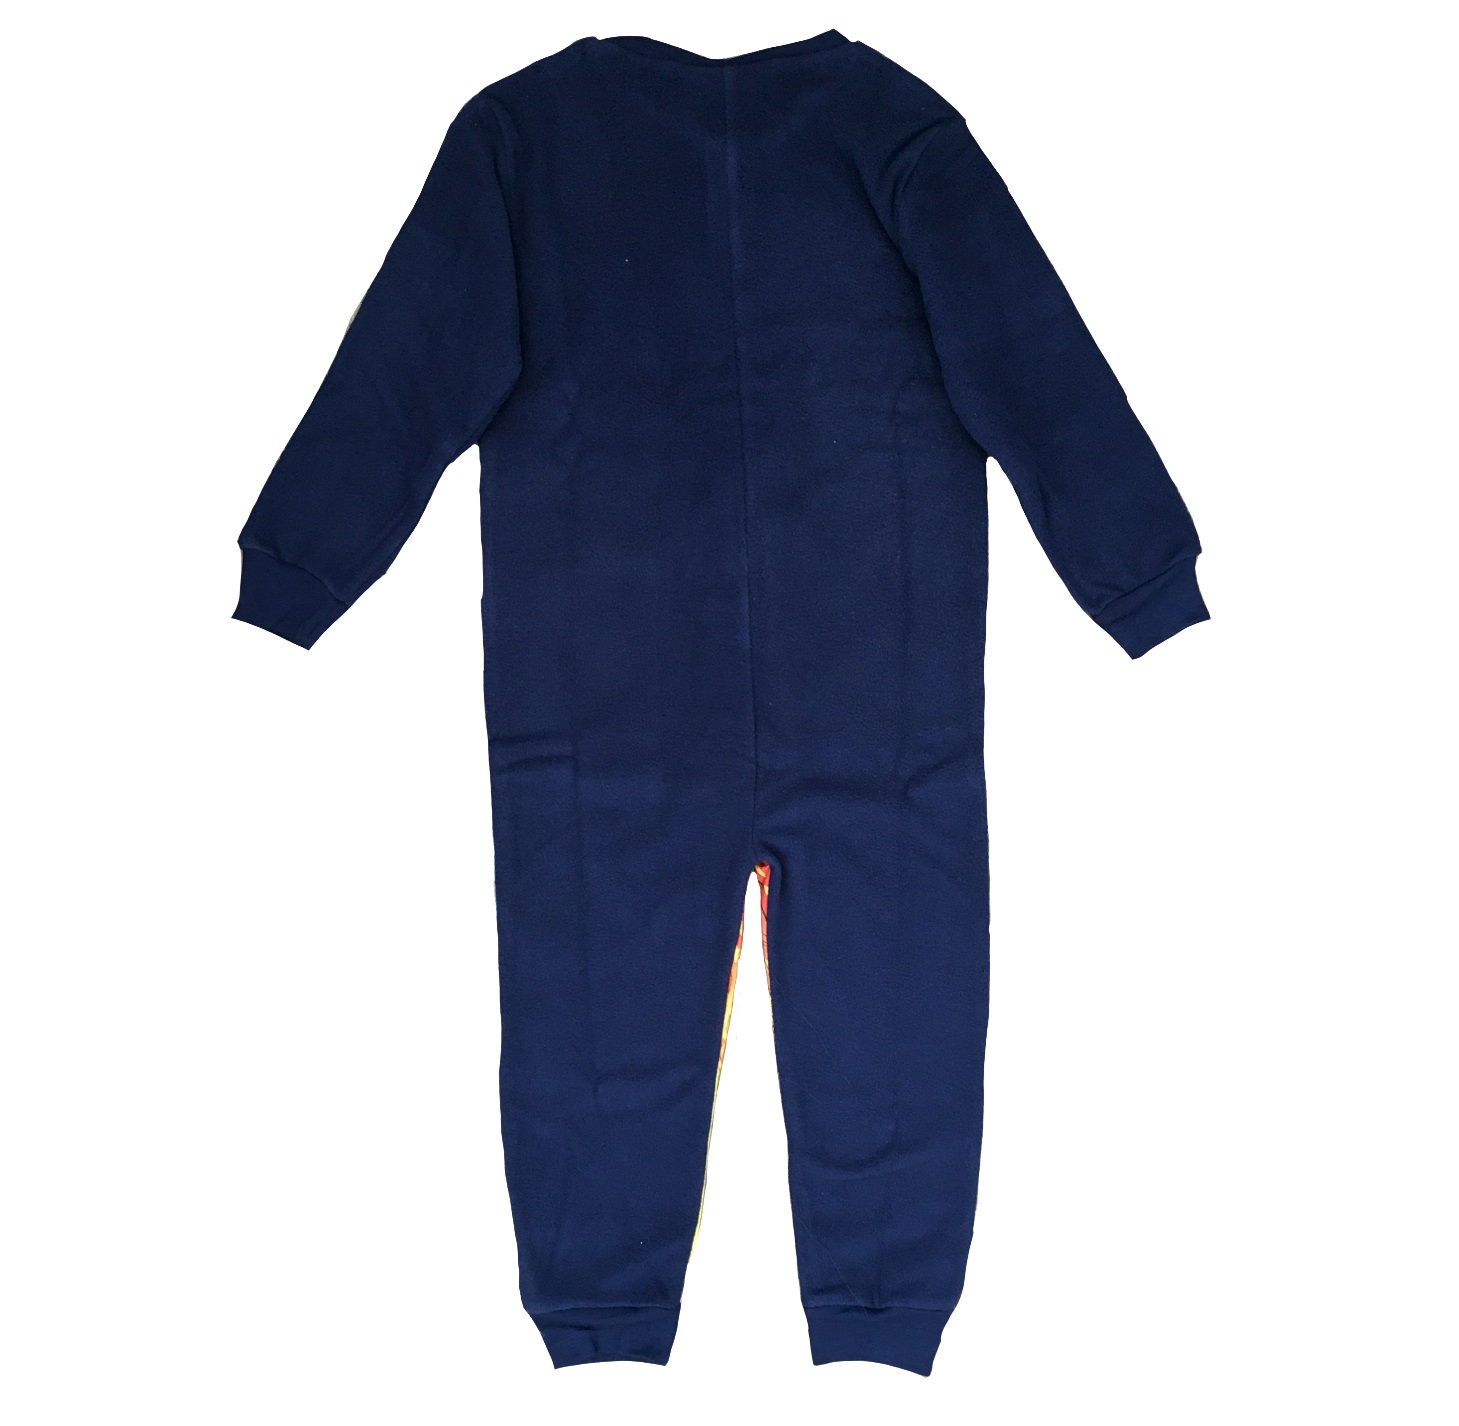 Boys Spiderman Onesie Age 18 Months - 10 Years - Kids With Character